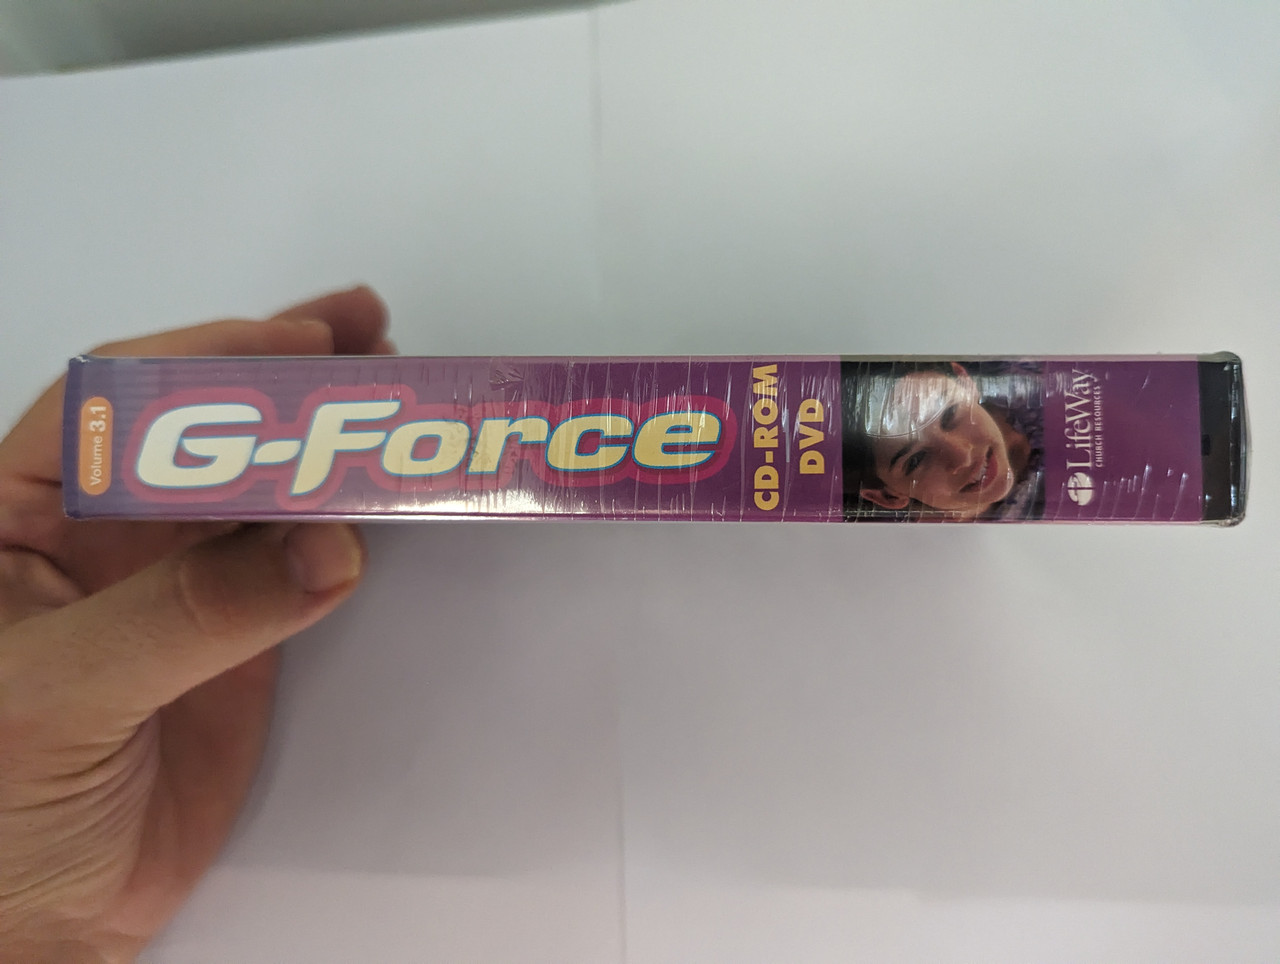 G-Force_Volume_3.1_CD-ROM_3_DVD_Pack_EXPERIENCE_GOD_FULL_BLAST_Electronic_visuals_games_music_and_sound_effects_Crews_Bible_Studies_DVD_9781415822647__33007.1697800177.1280.1280.jpg (1280×964)